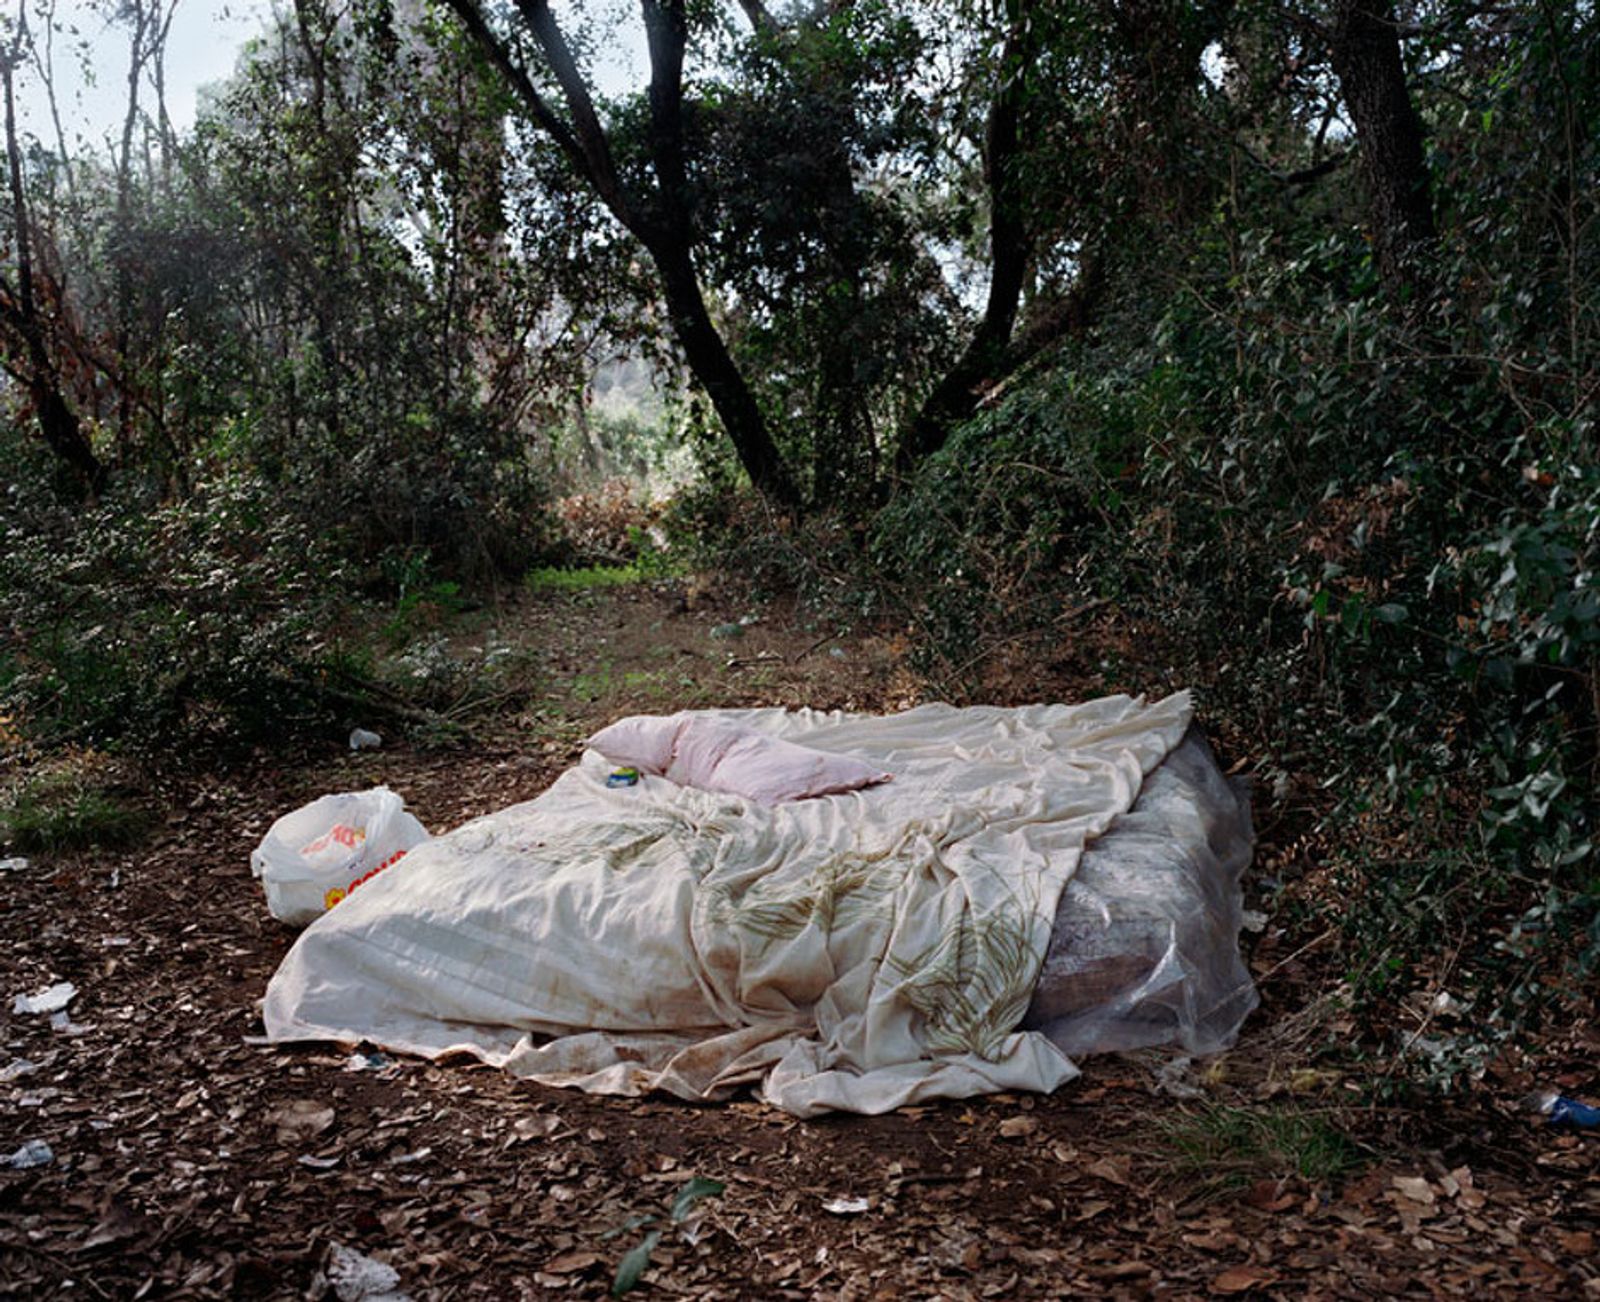 © Paolo Patrizi - A mattress used by sex workers in a wooded area on the outskirts of Rome